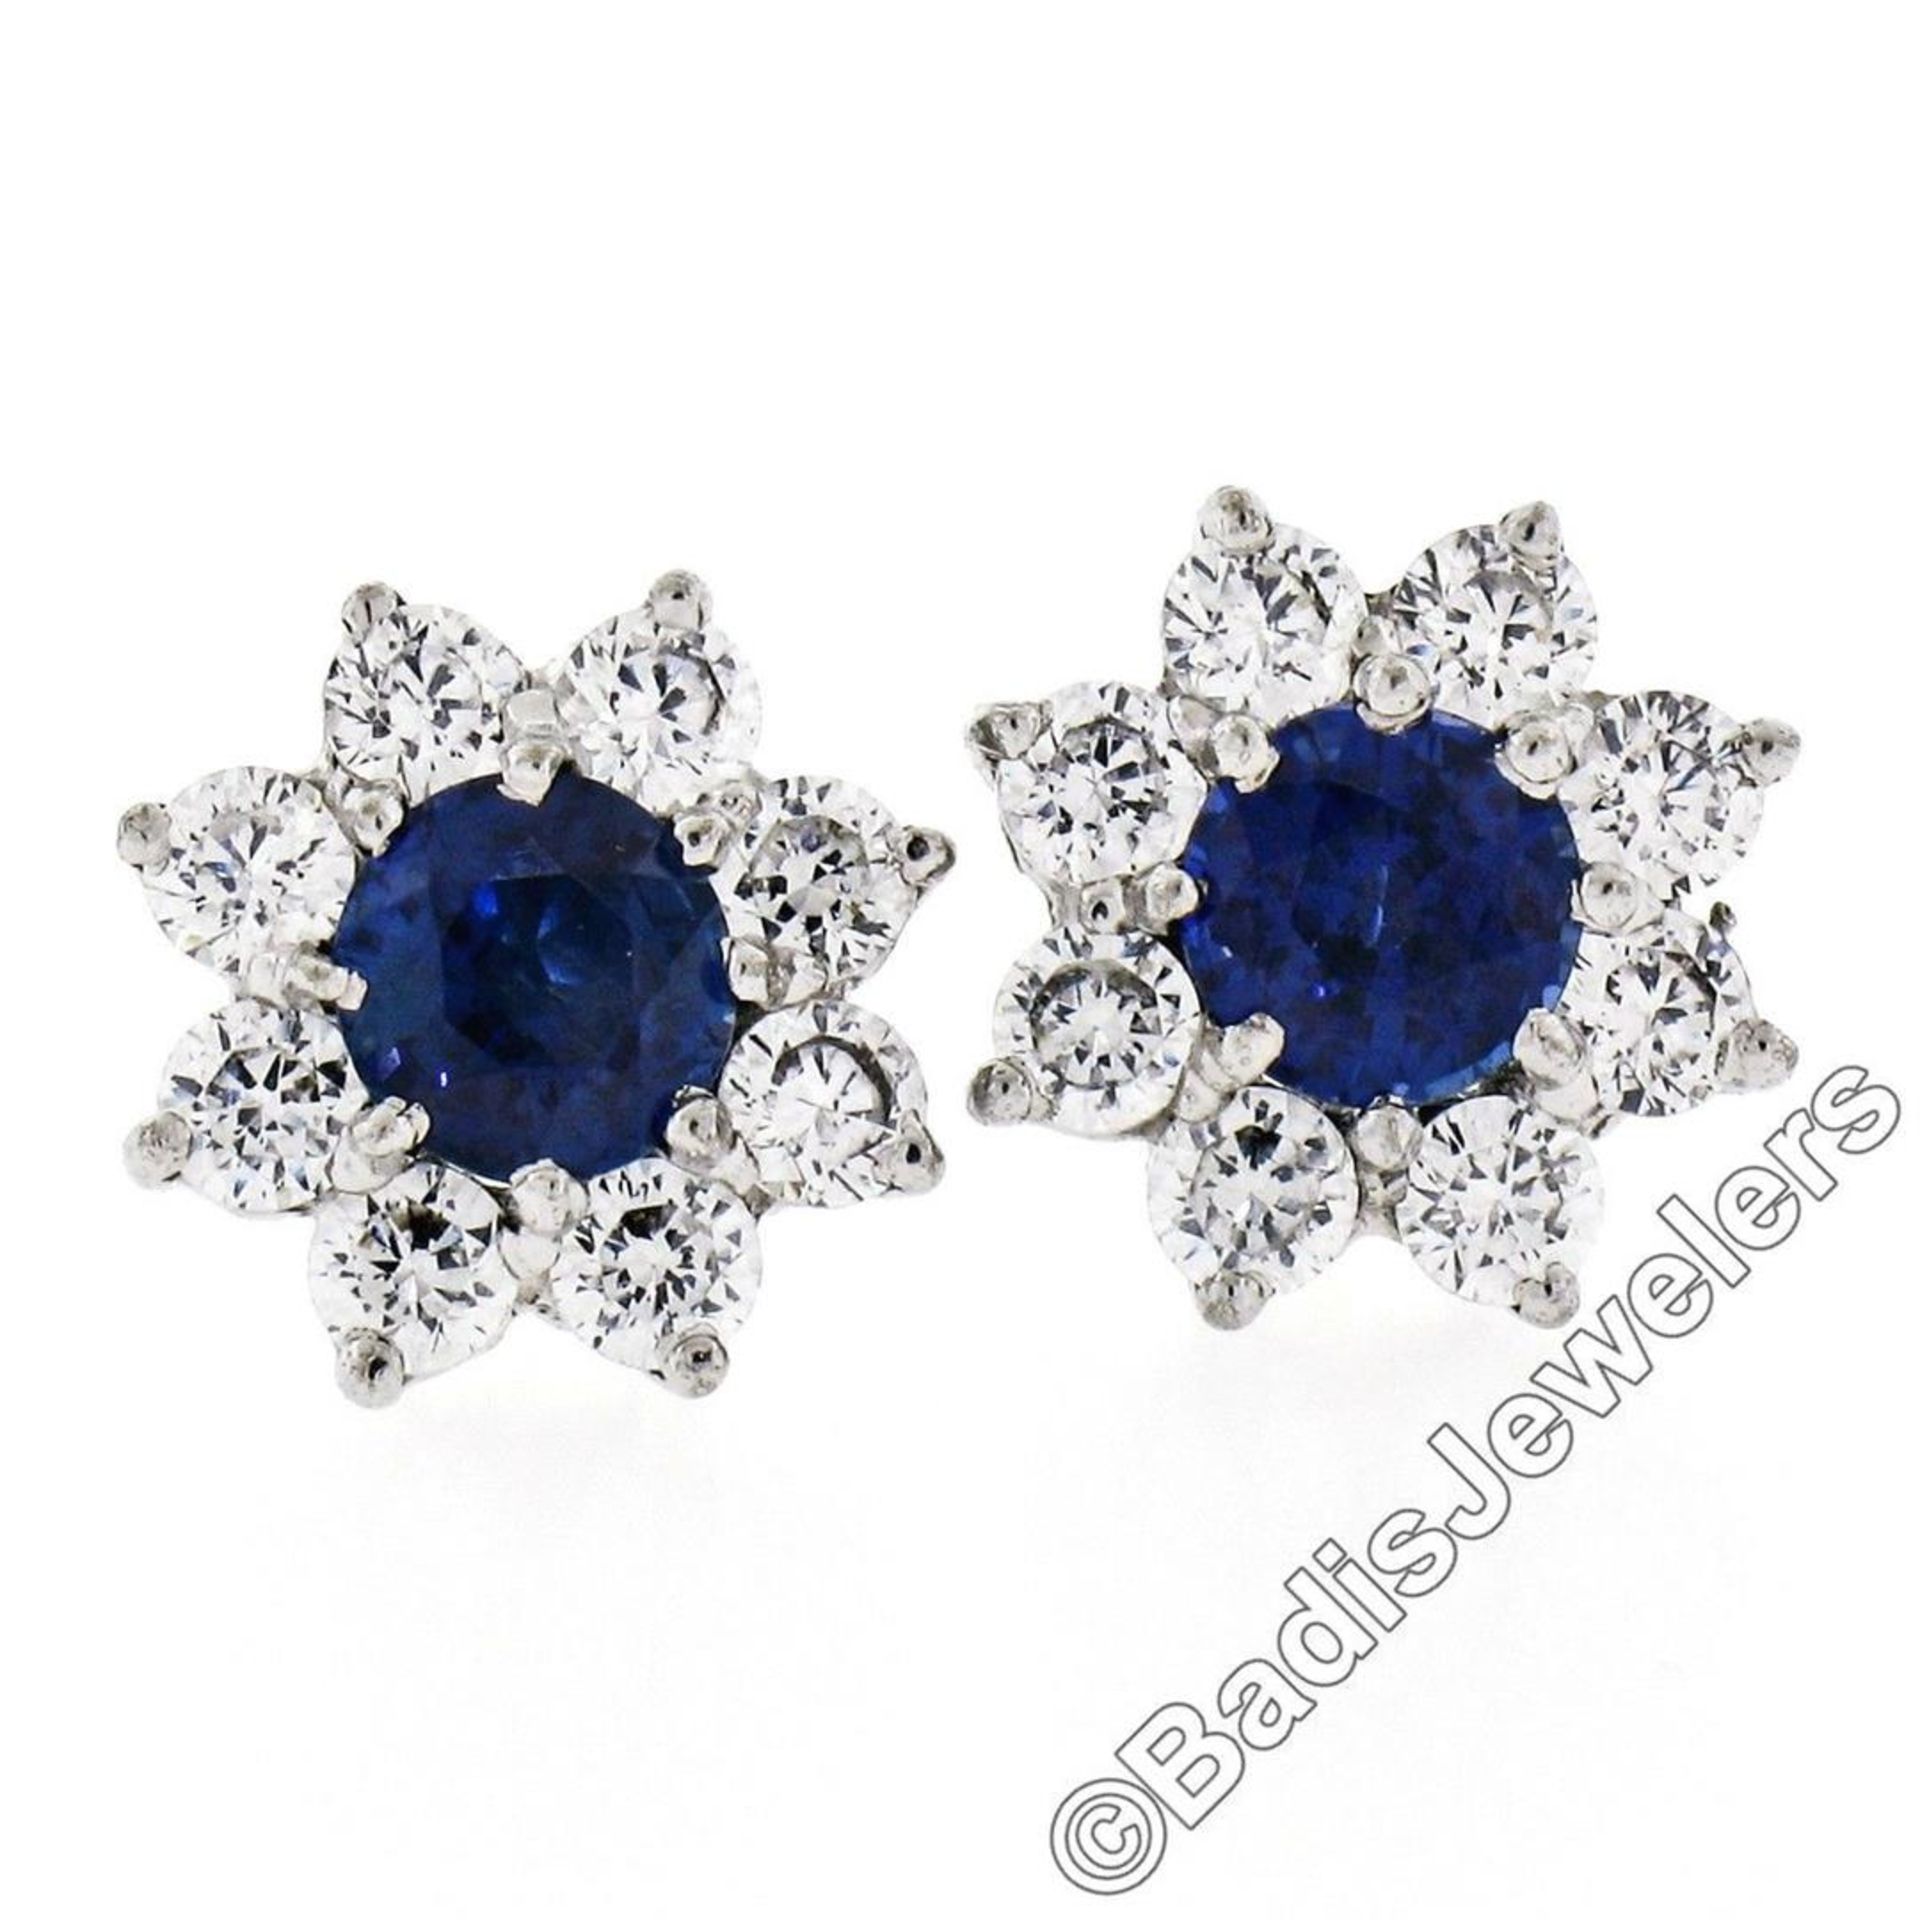 Sterling Silver Blue Crystal & CZ Halo Stud Earrings w/ 14kt White Gold Posts